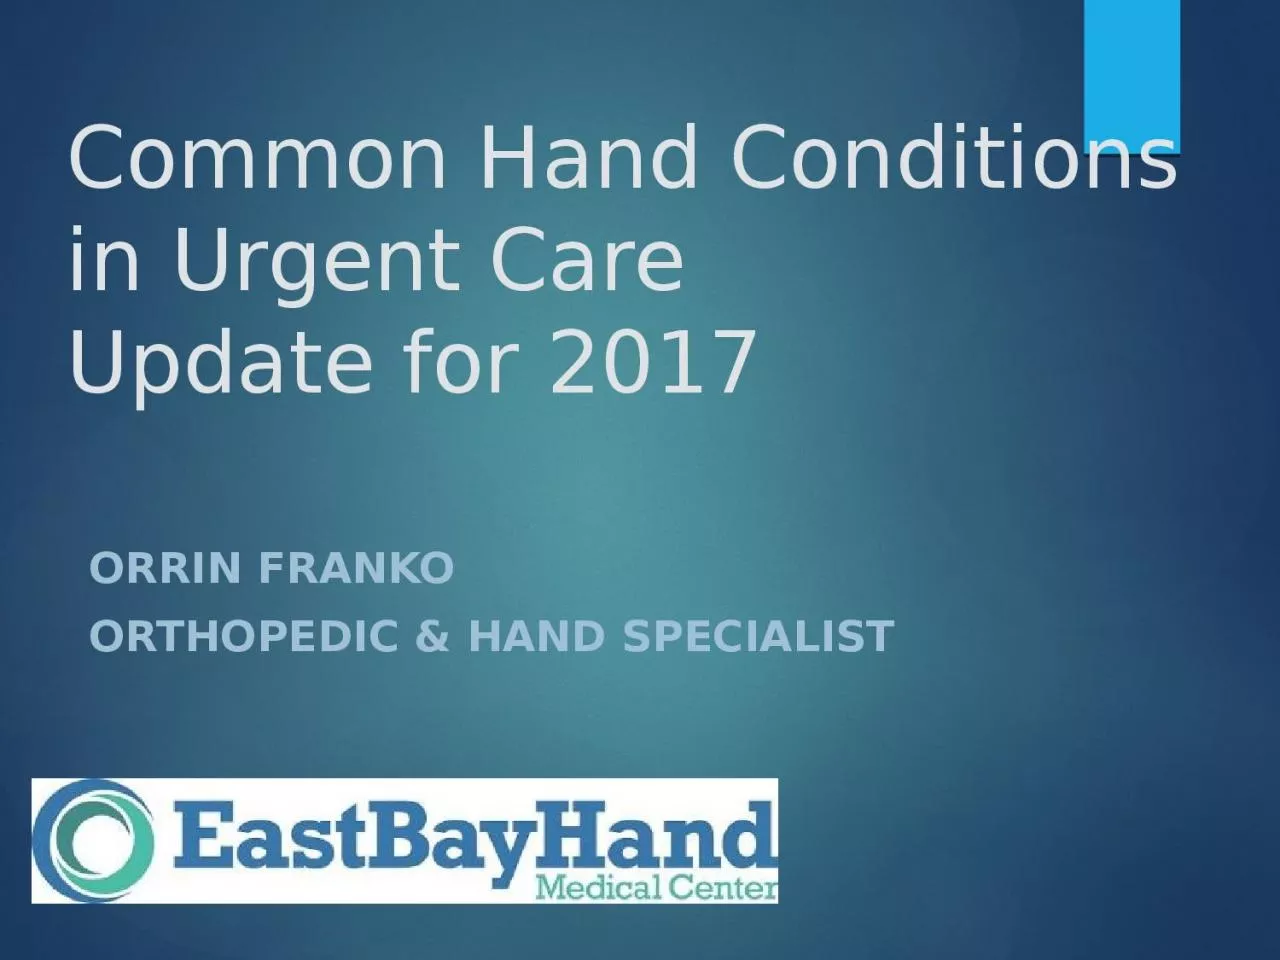 Common Hand Conditions in Urgent Care